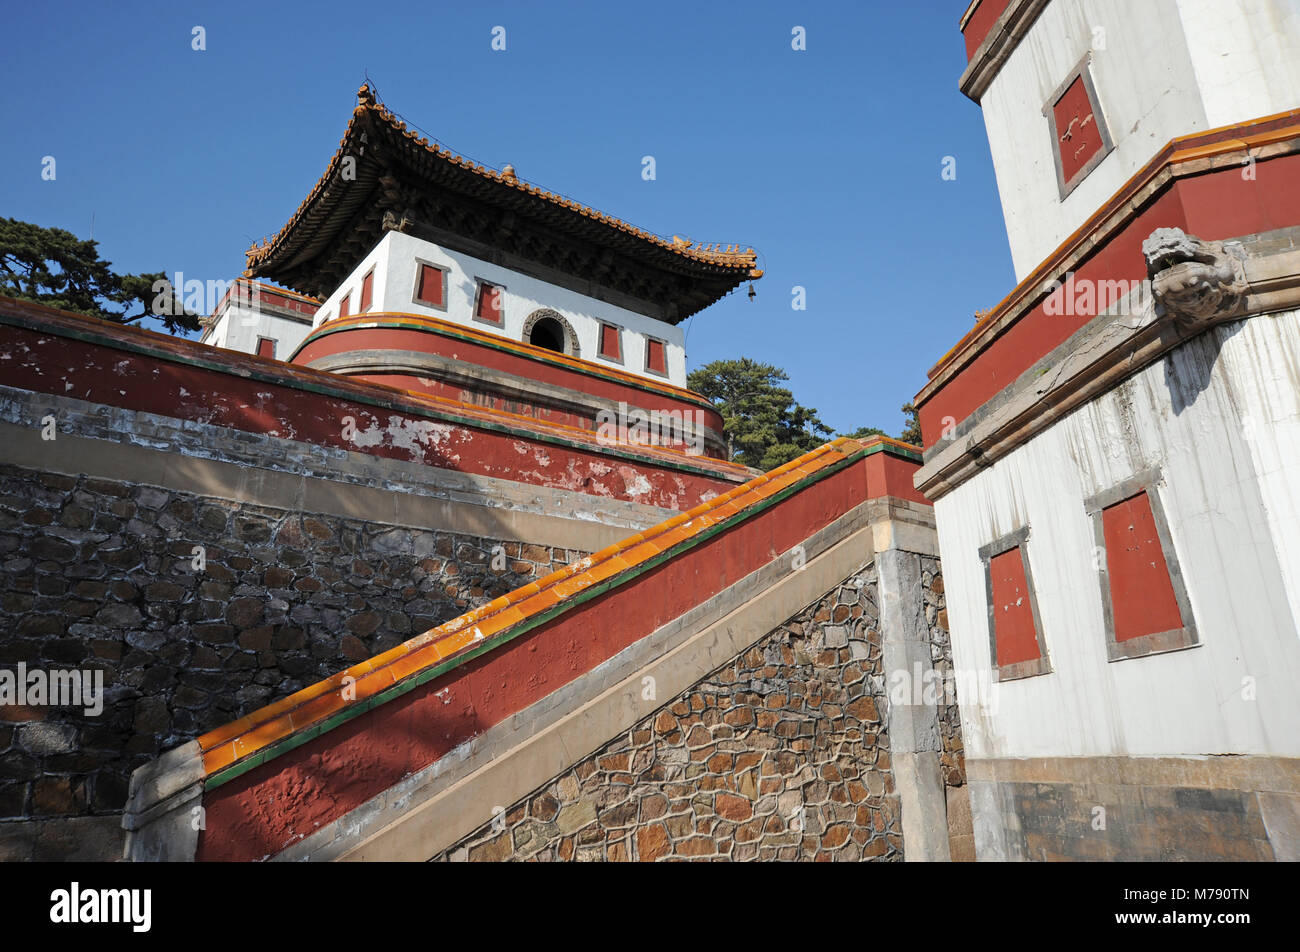 Buildings in front of the Bodhisattva hall at the Puning temple in Chengde, Hebei province, China Stock Photo